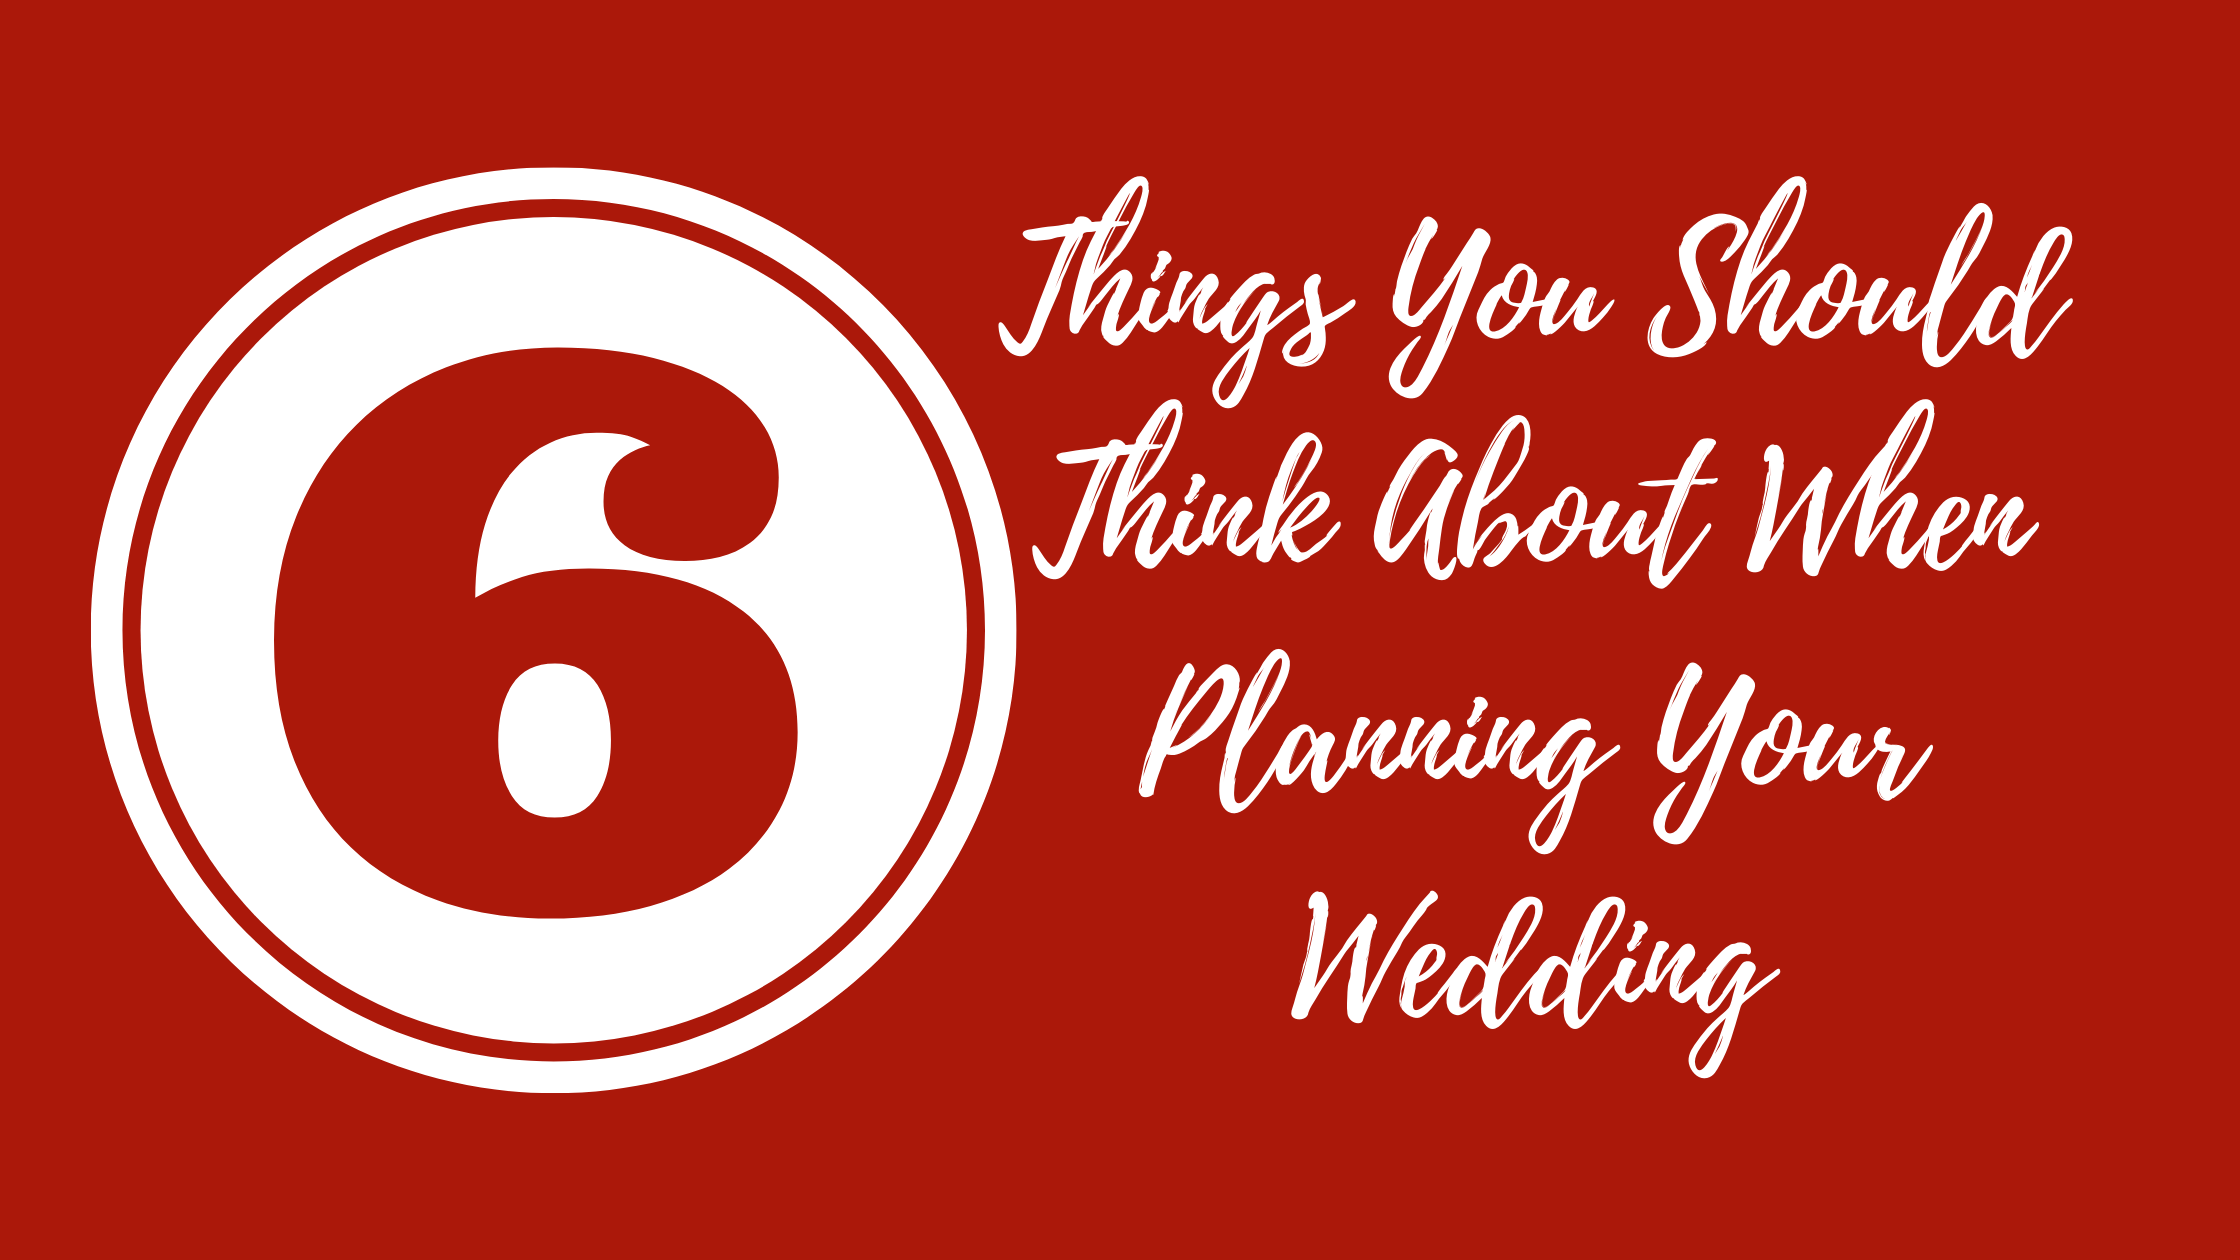 Six Things You Should Think About When Planning Your Wedding!!